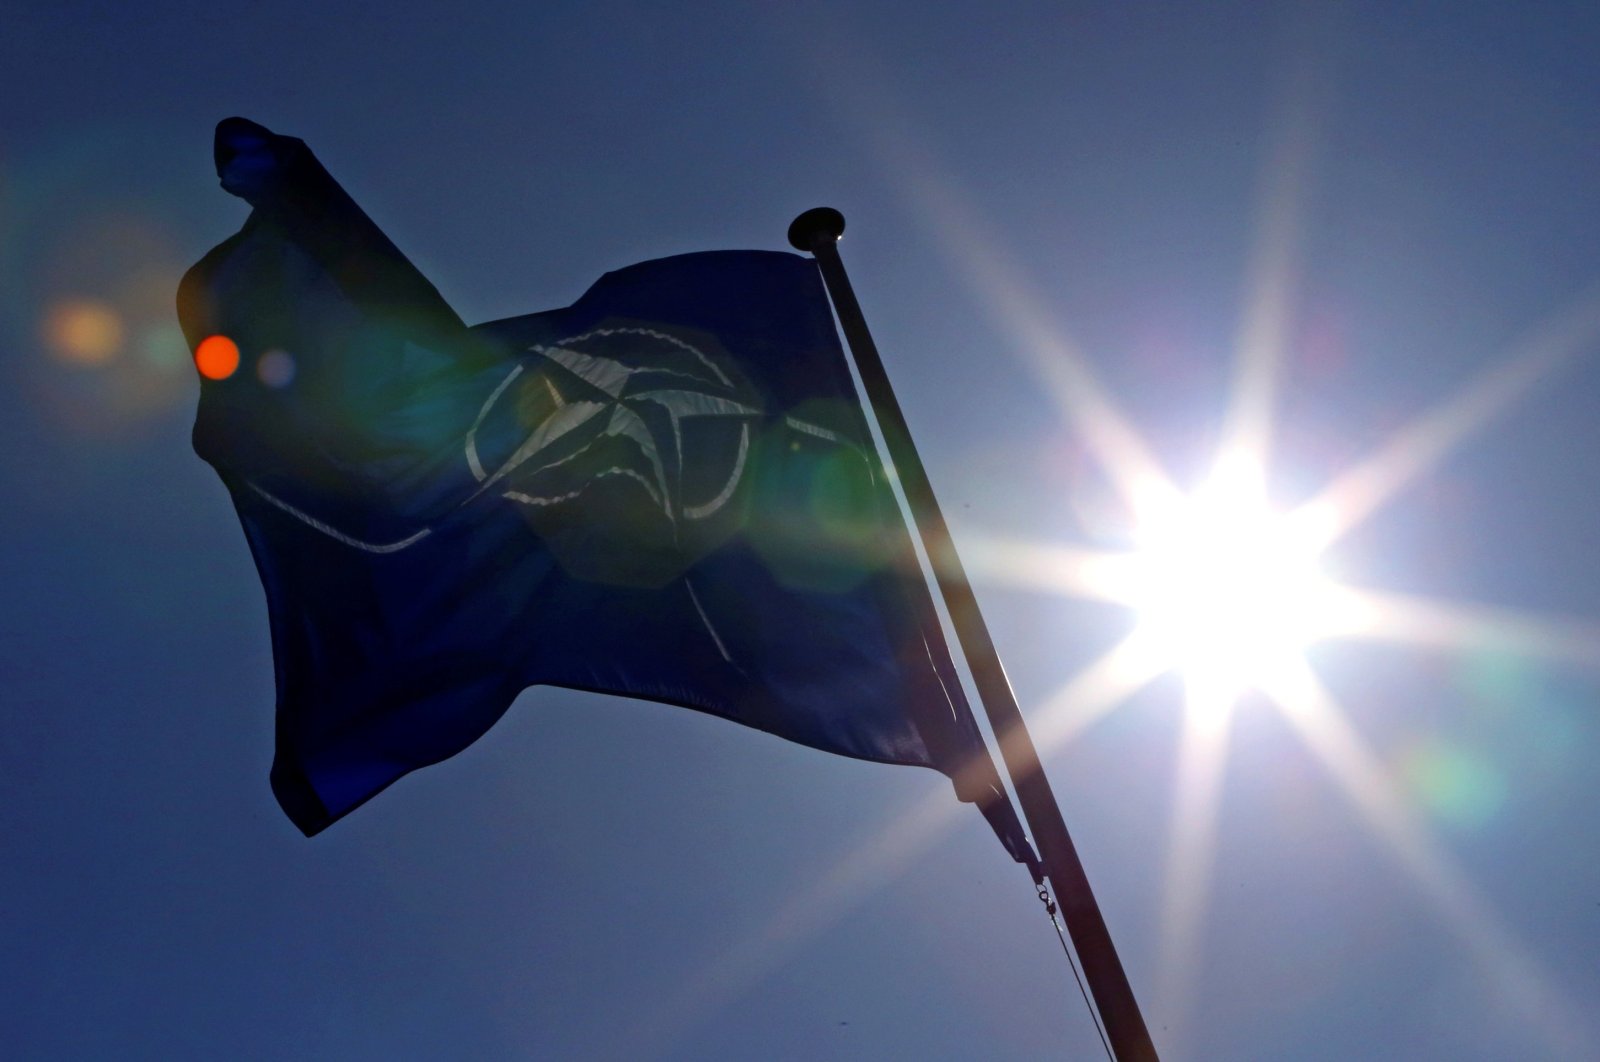 A NATO flag flies at the alliance headquarters in Brussels during a NATO ambassadors meeting on the situation in Ukraine and the Crimea region, March 2, 2014. (Reuters Photo)